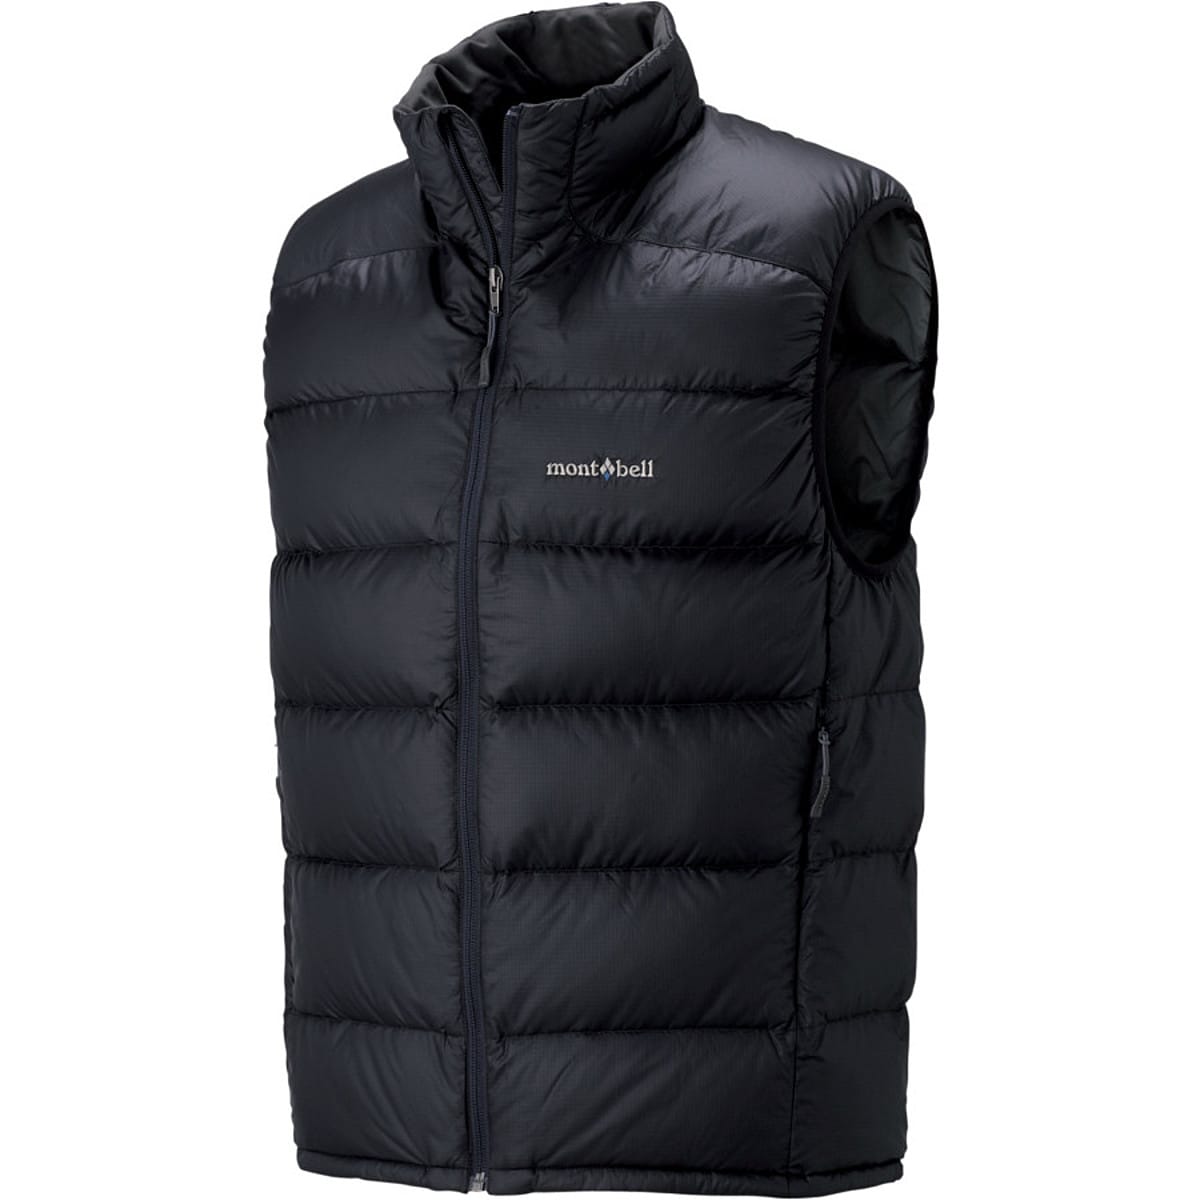 Review: Montbell UL Down Vest - SierraDescents.com